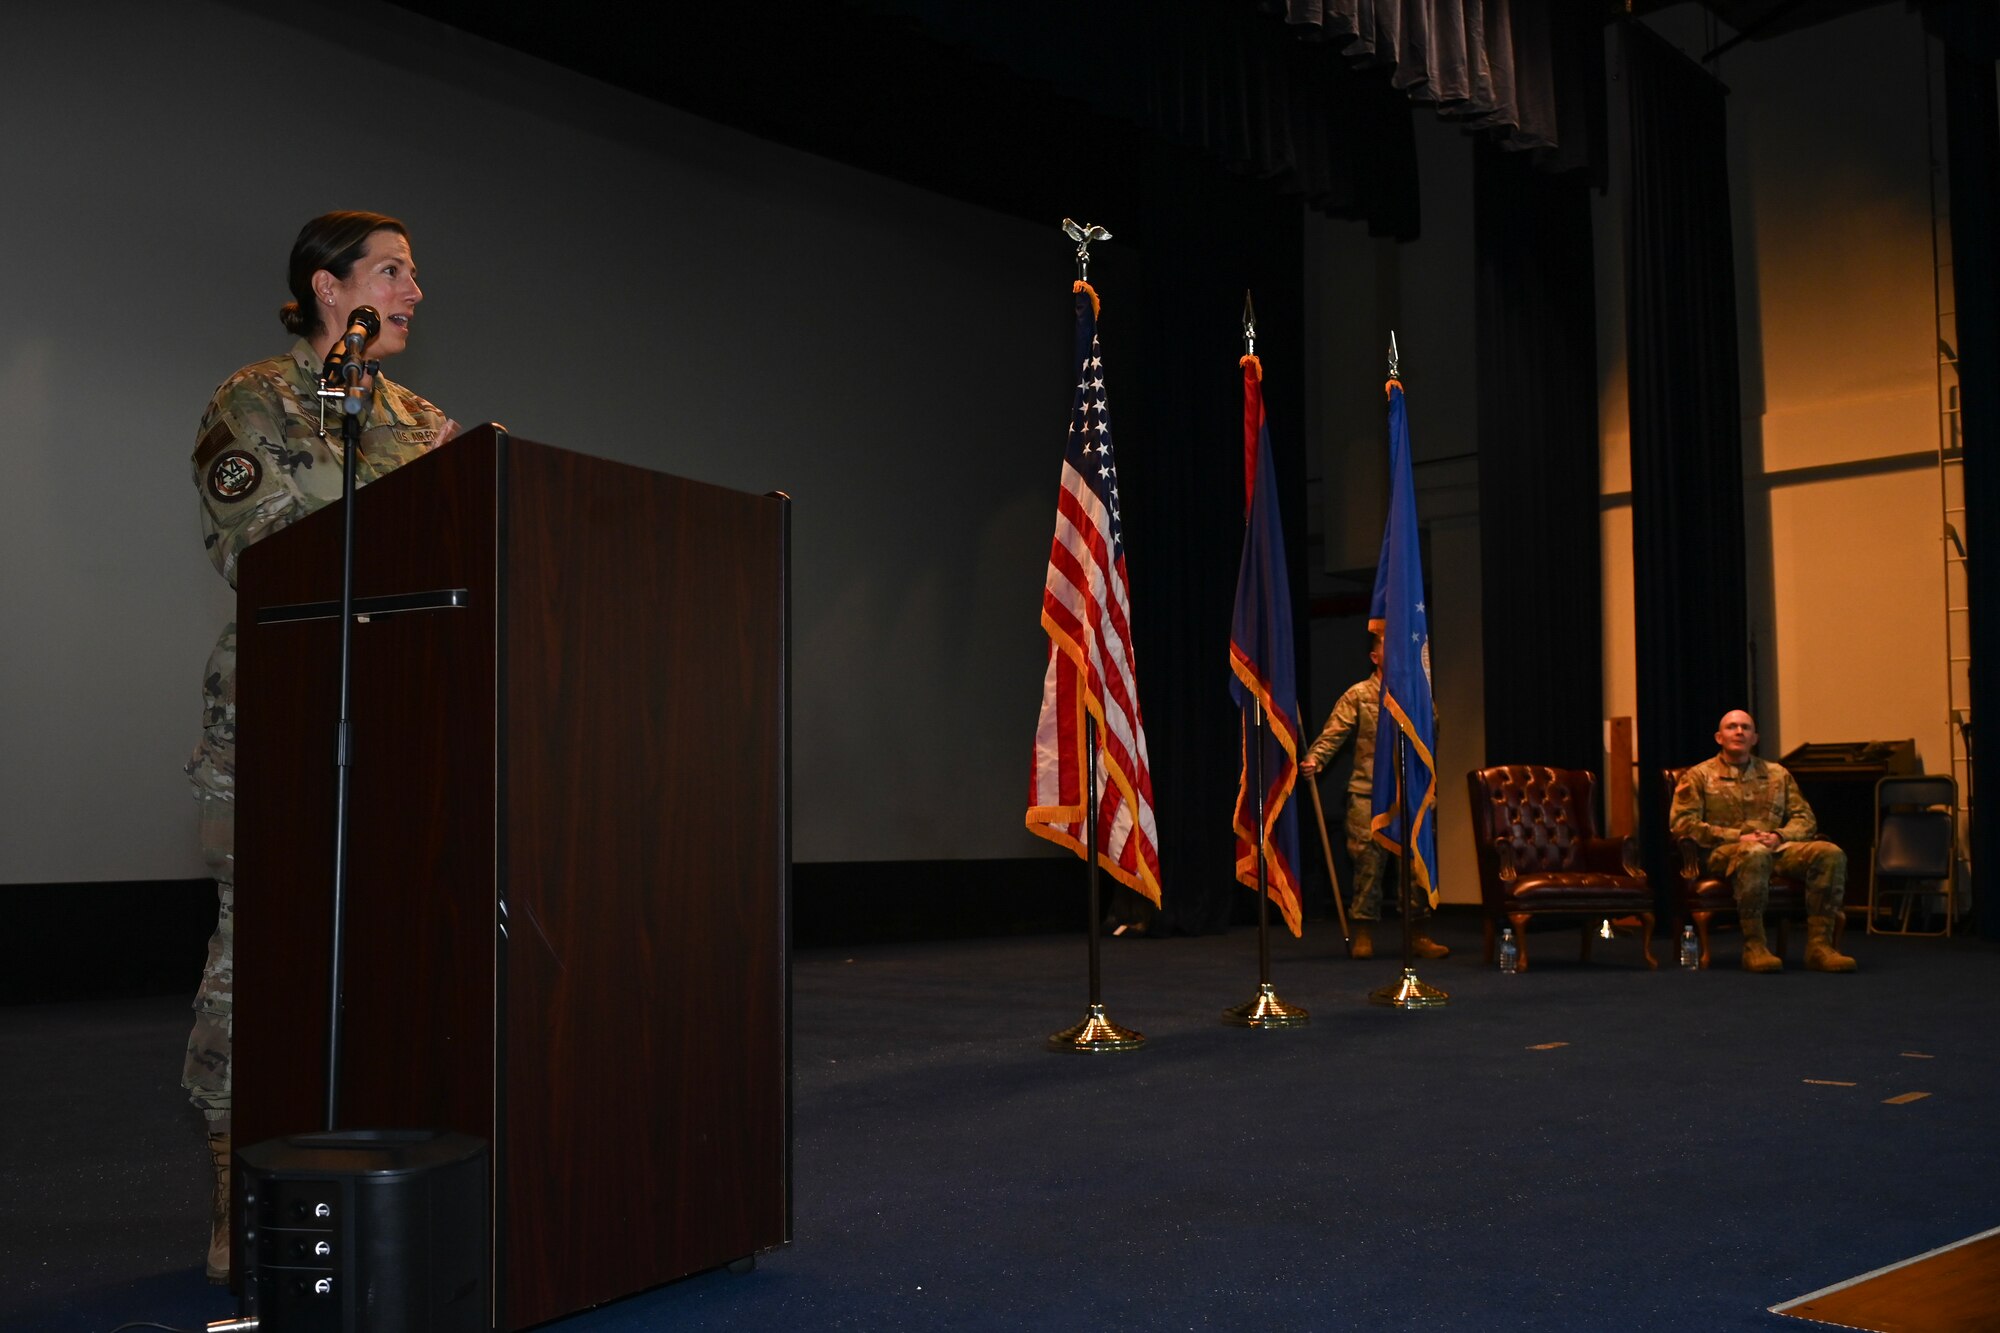 An Air Force commander stands on stage behind a podium and speaks to the audience.